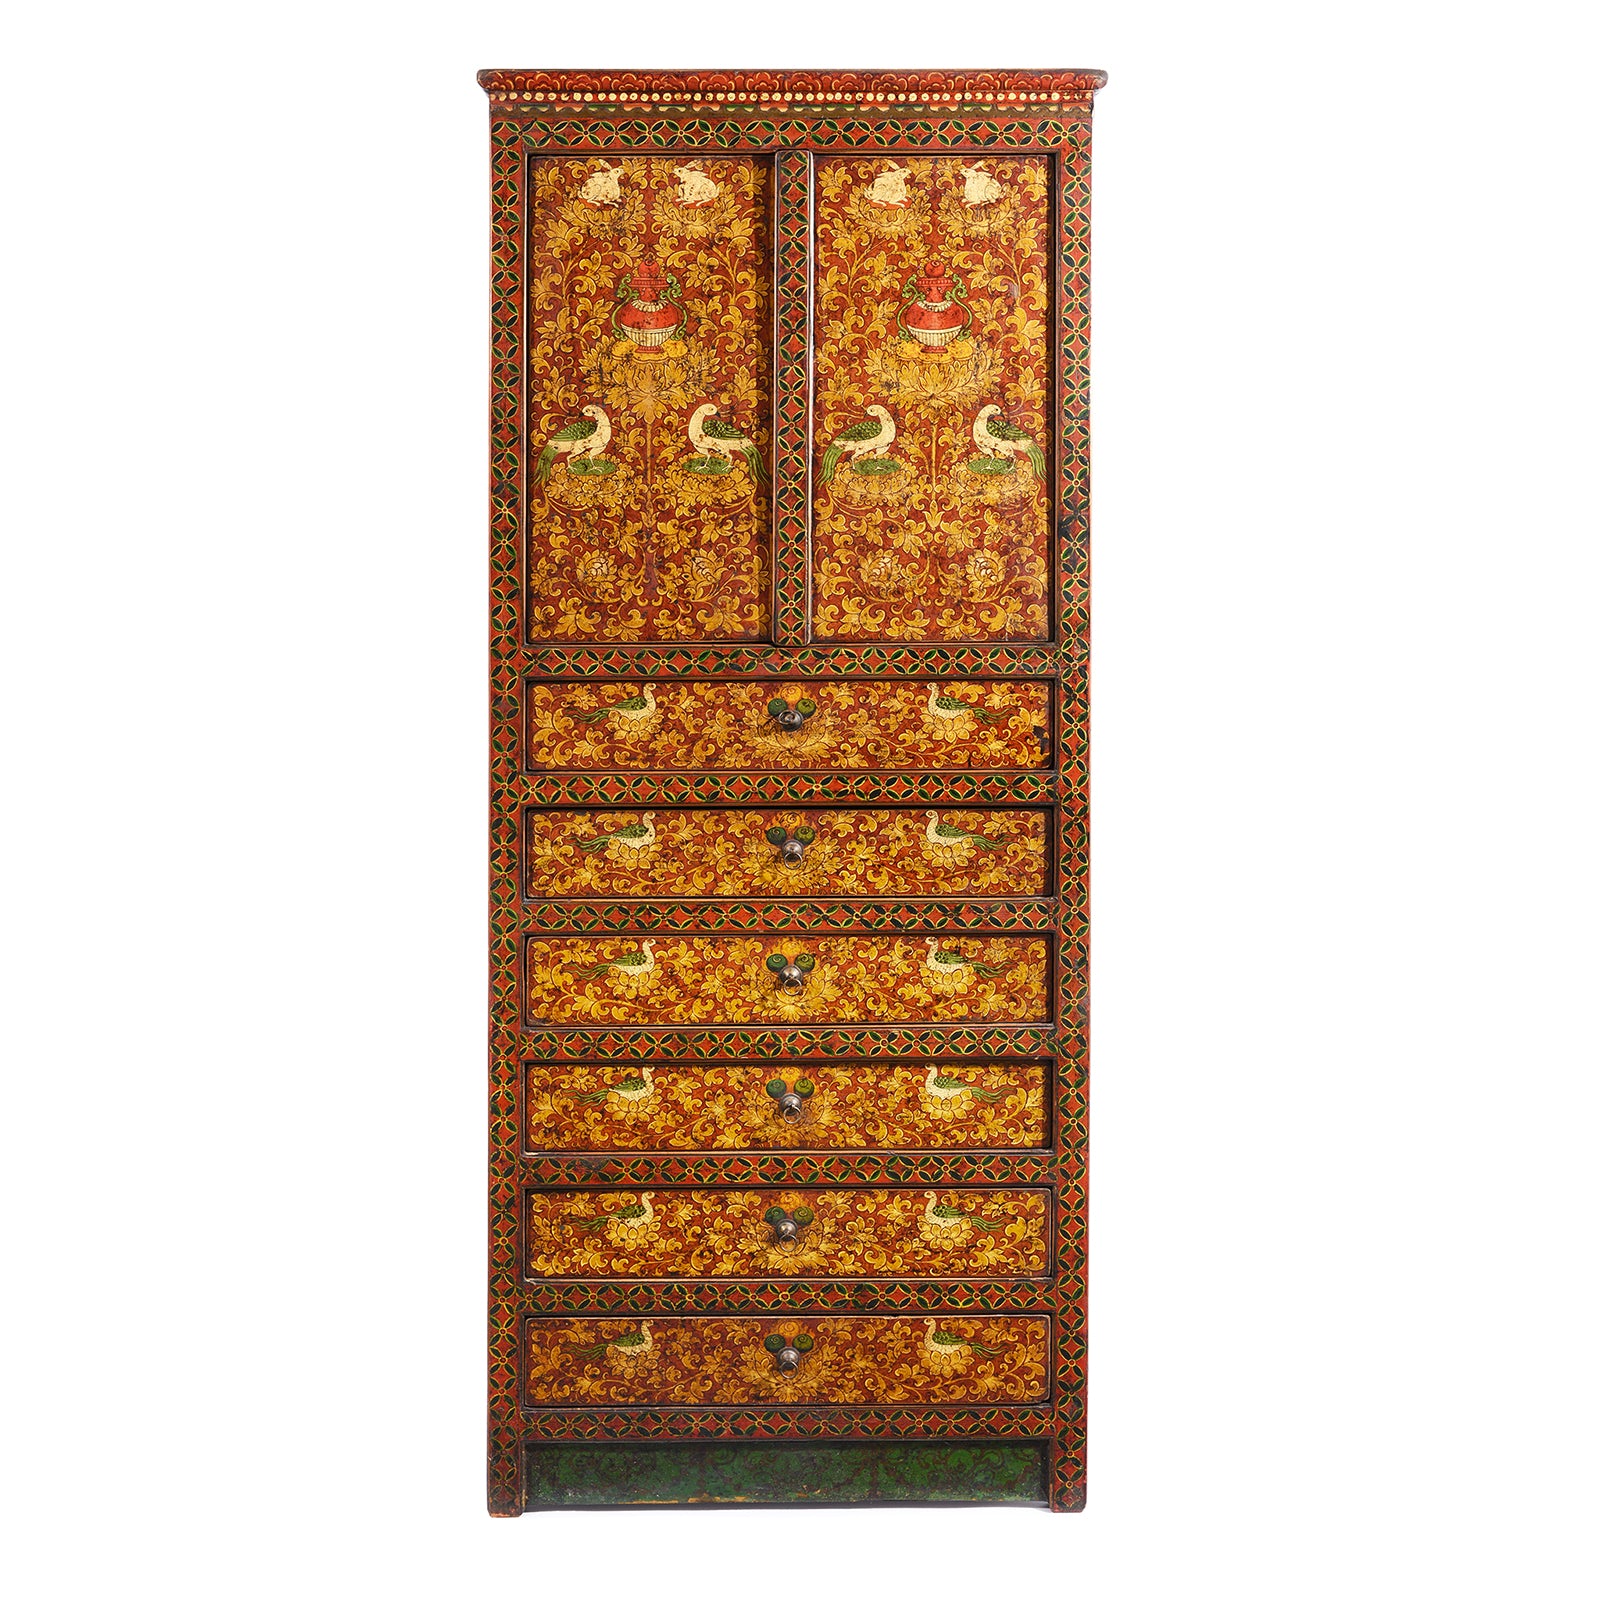 Painted Reproduction Tall Tibetan Cabinet | Indigo Antiques